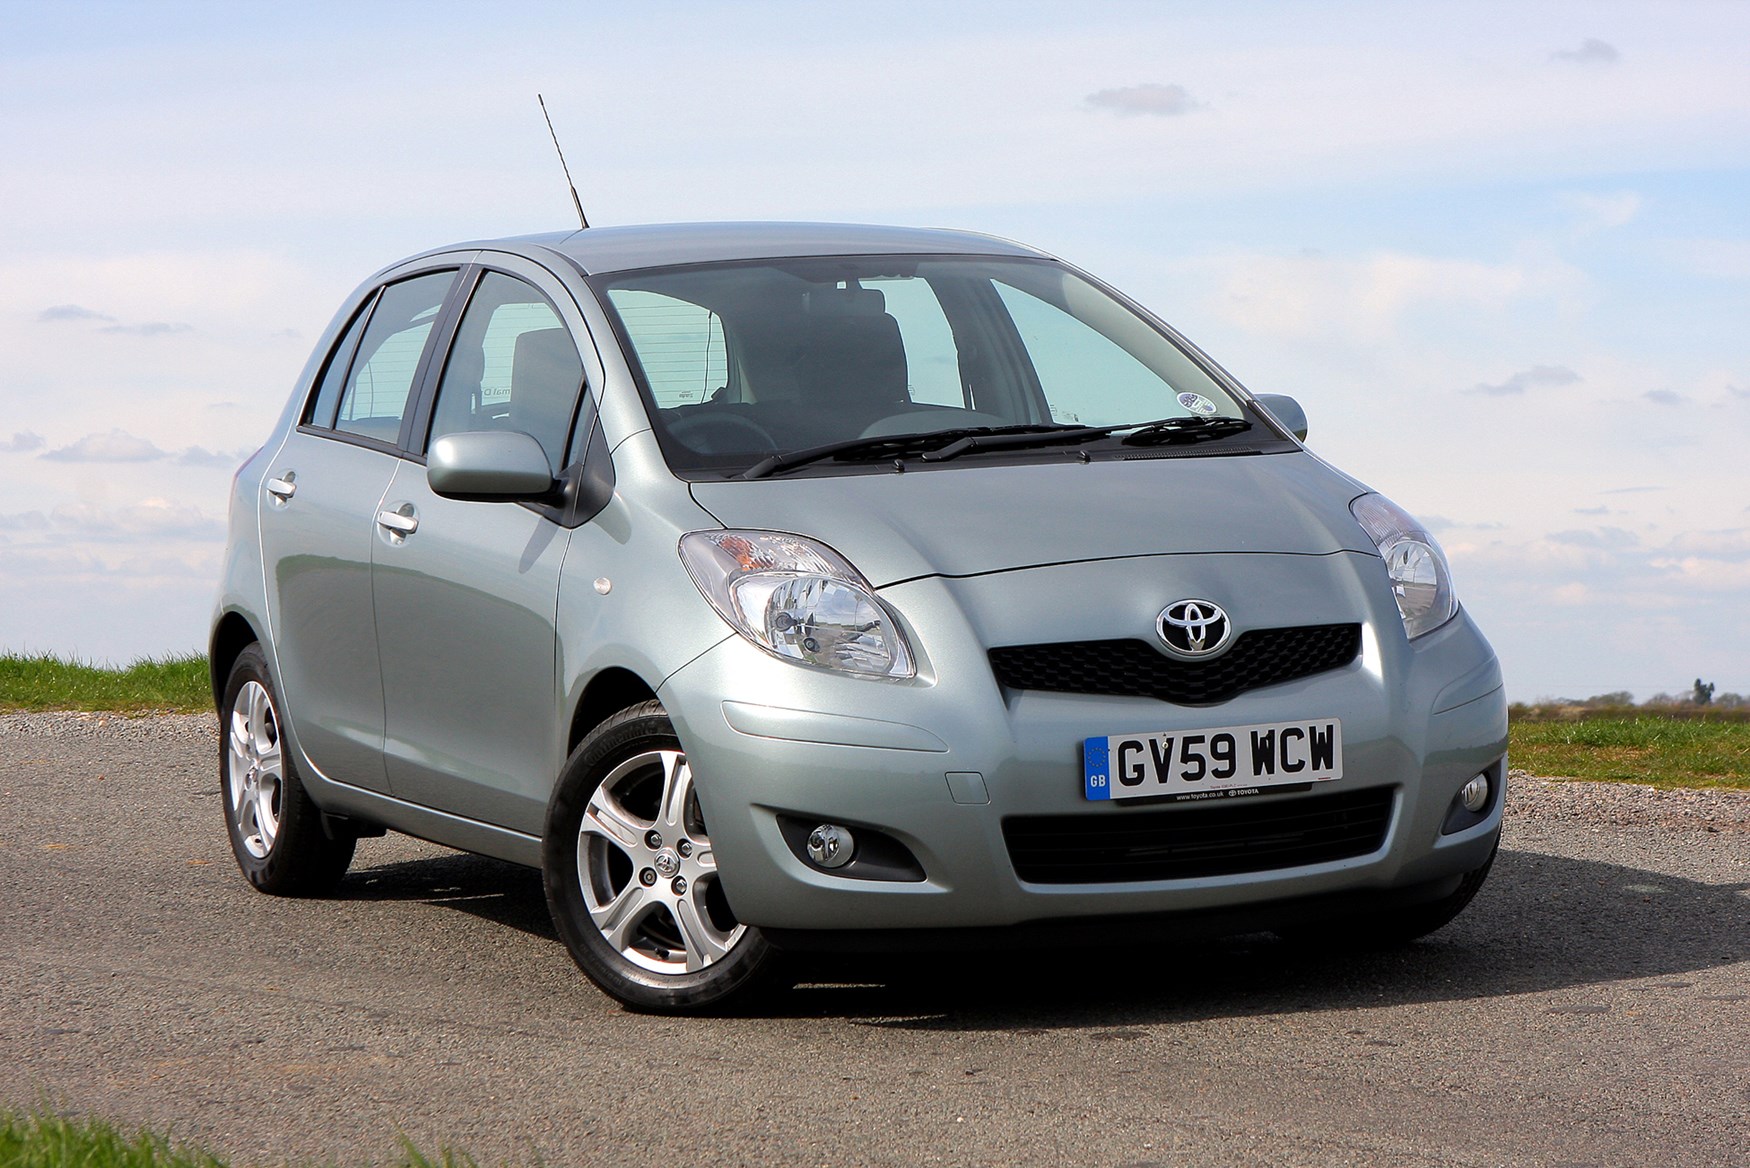 Used Toyota Yaris Hatchback (2006 - 2011) Review | Parkers